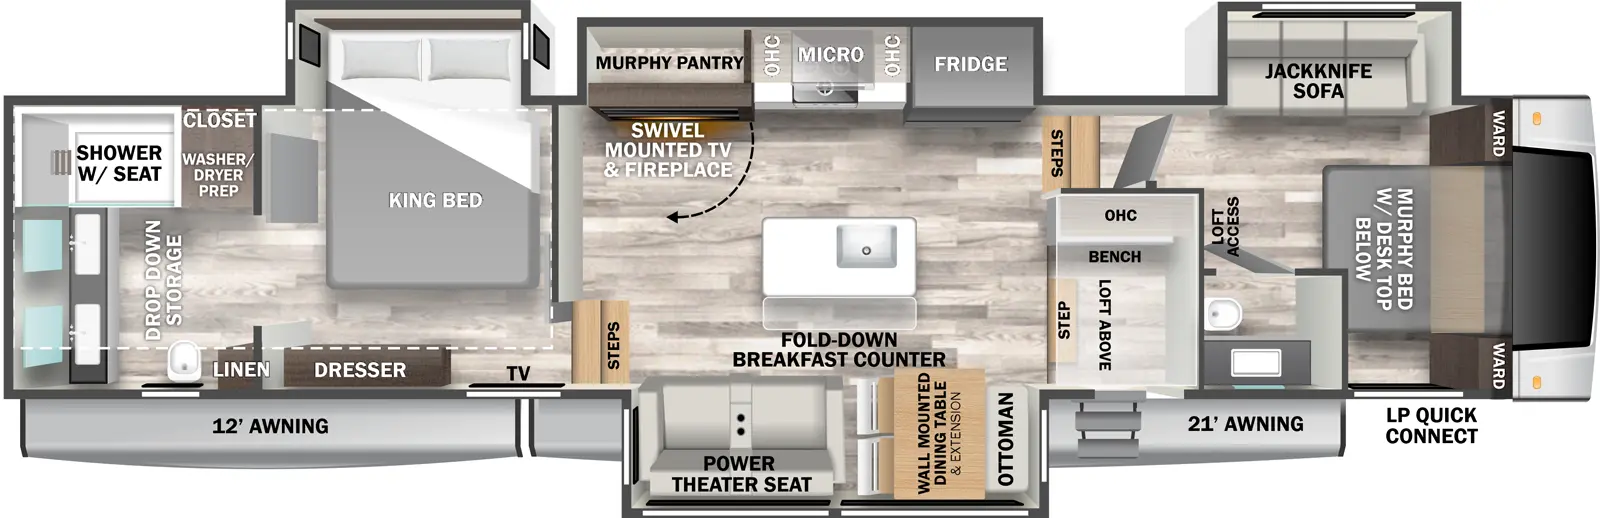 The 380MUD has four slideouts and one entry. Exterior features LP quick connect, and 12 foot and 21 foot awnings. Interior layout front to back: front murphy bed with desk top below, wardrobes on each side, off-door side jackknife sofa, and door side half bathroom; off-door side steps down to main living area; door side mud room with bench and overhead cabinet, step up to main living area, and loft above; off-door side slideout with refrigerator, cooktop, microwave, overhead cabinet, and swivel mounted TV and fireplace with murphy pantry behind; kitchen island with sink and fold-down breakfast counter; door side slideout with wall mounted dining table, extension and ottoman, and power theater seat; door side steps up to rear bedroom with drop down storage below; off-door side king bed slideout and door side dresser and TV; rear bedroom with dual sinks, linen closet, shower with seat, and closet with washer/dryer prep.